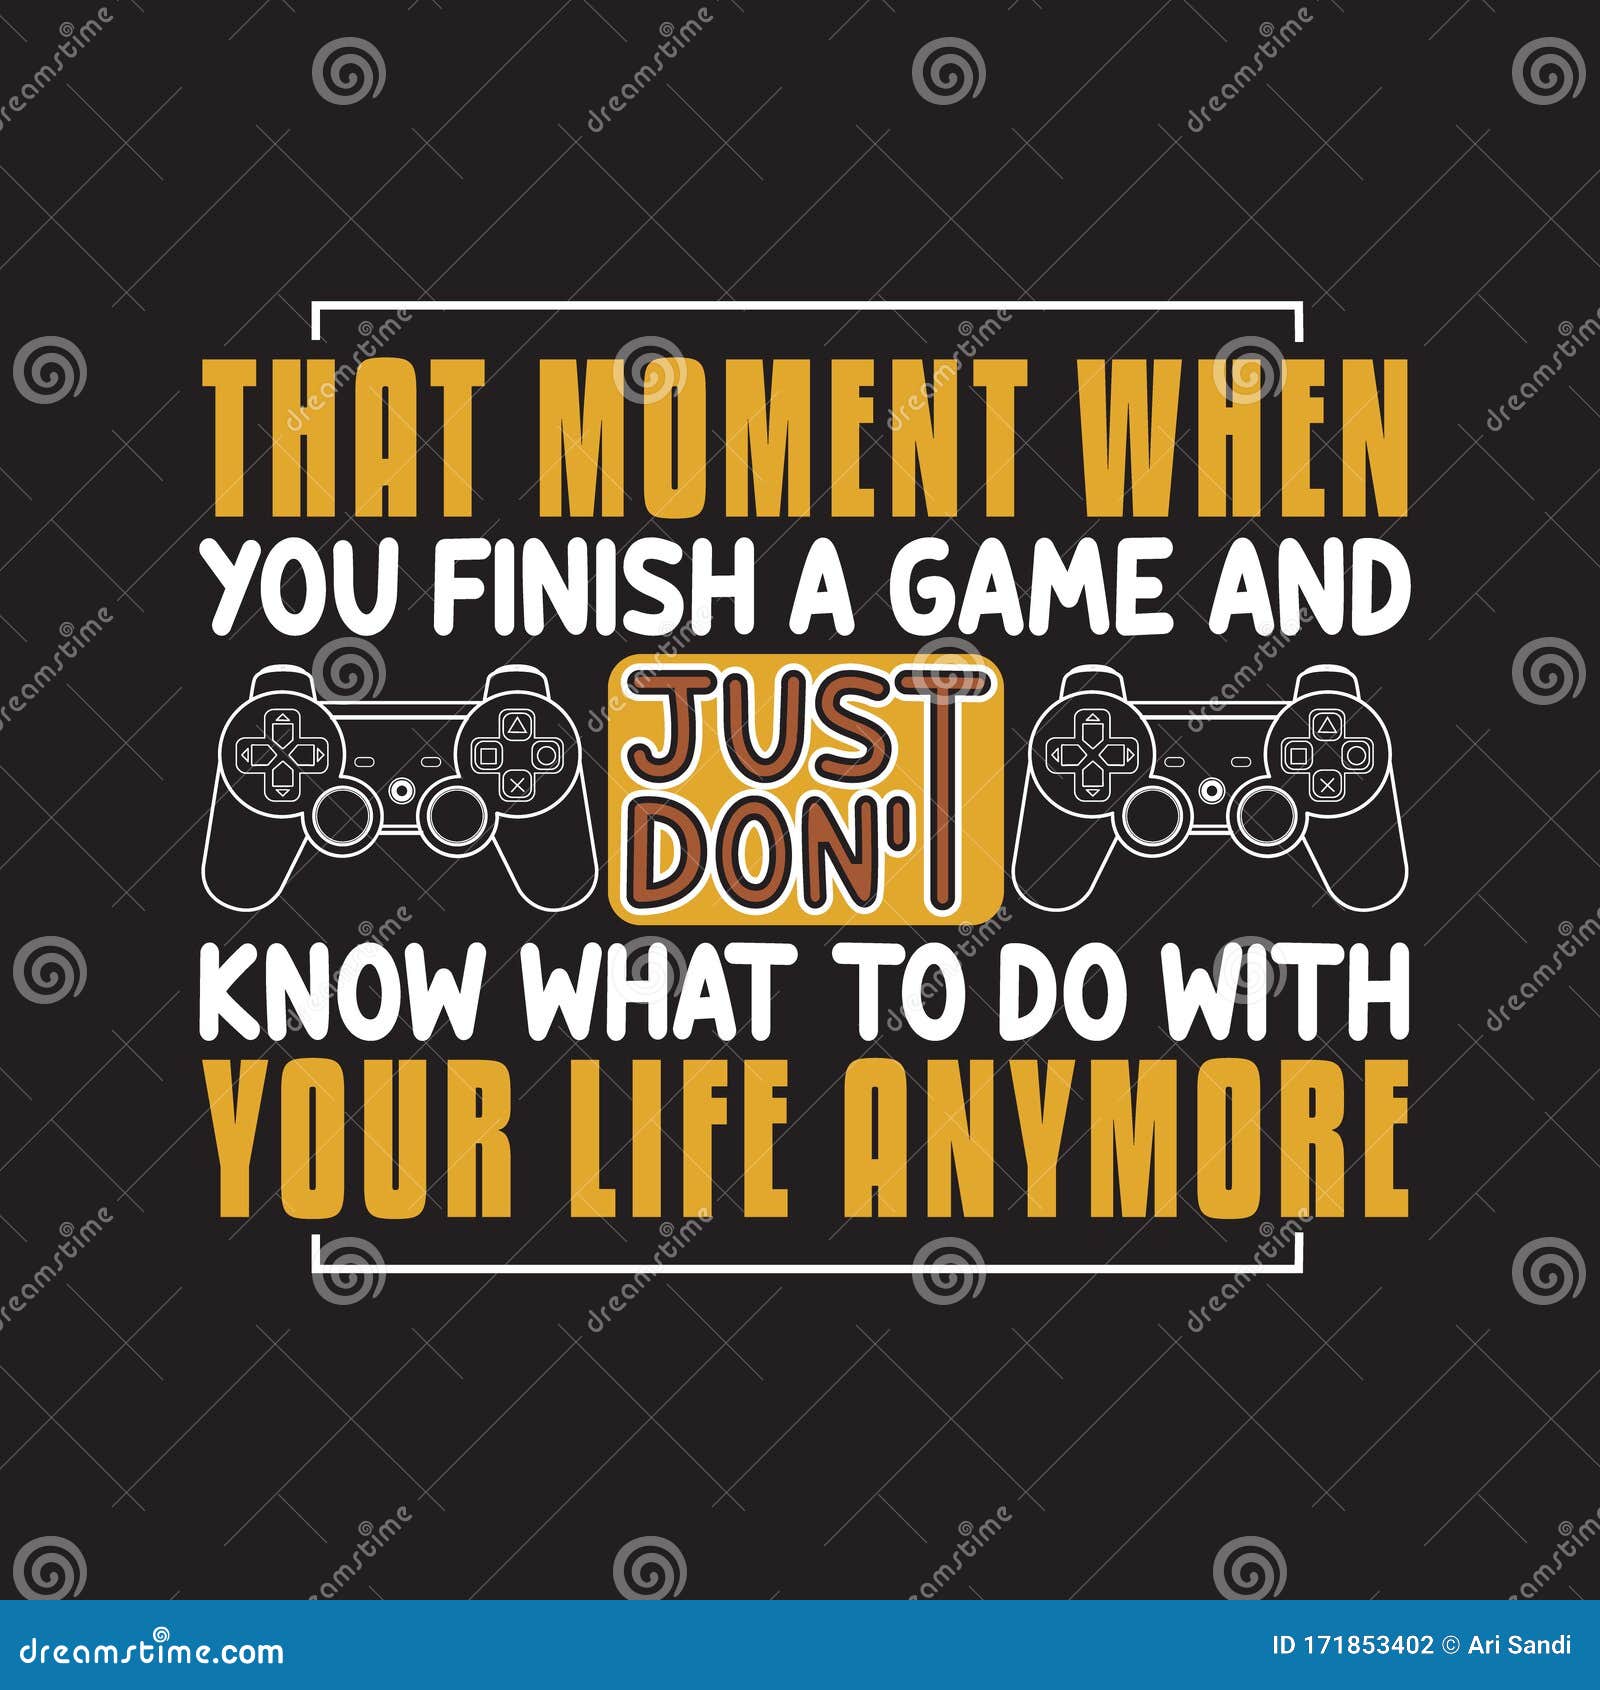 101 Inspirational Quotes About Gaming & Life (FUN)